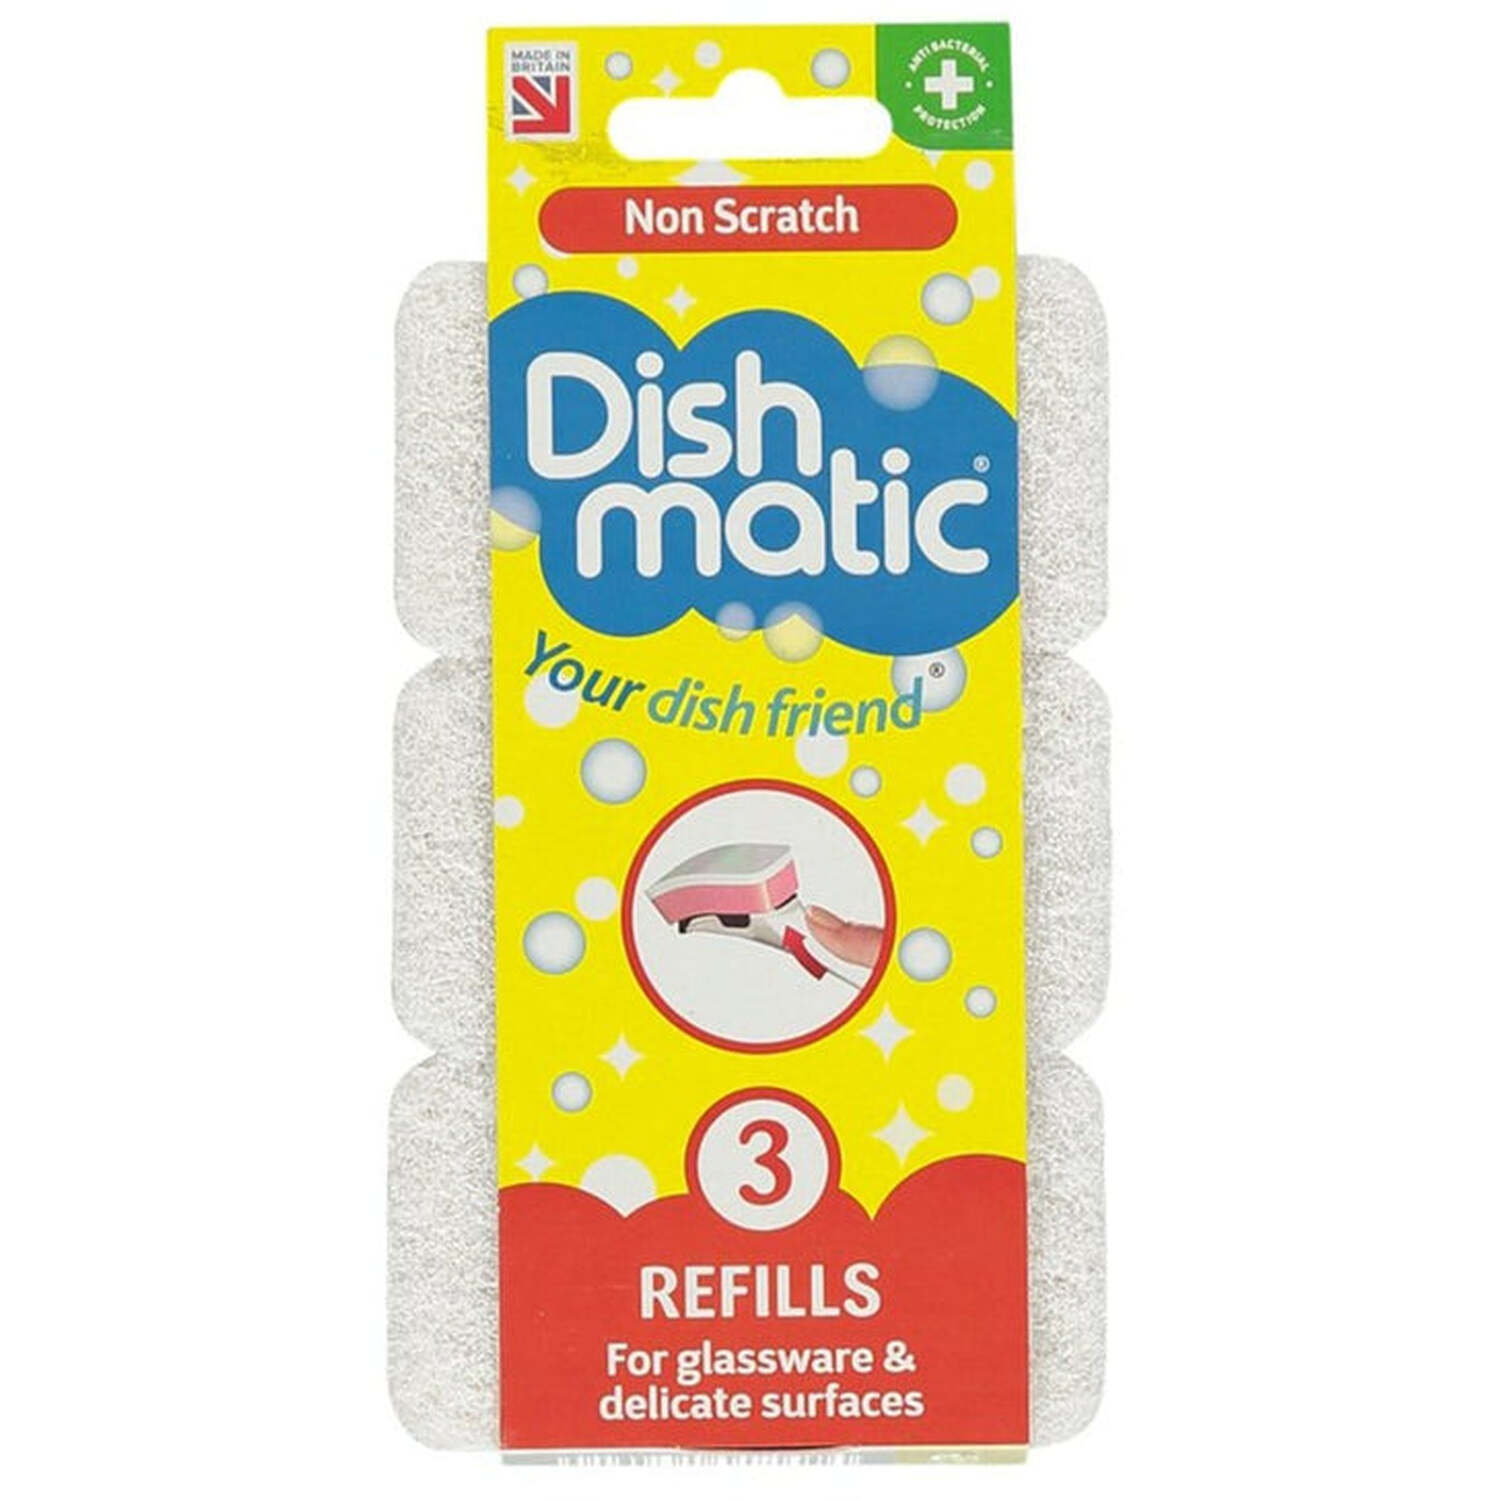 Pack of 3 Dishmatic Non Scratch Refills Image